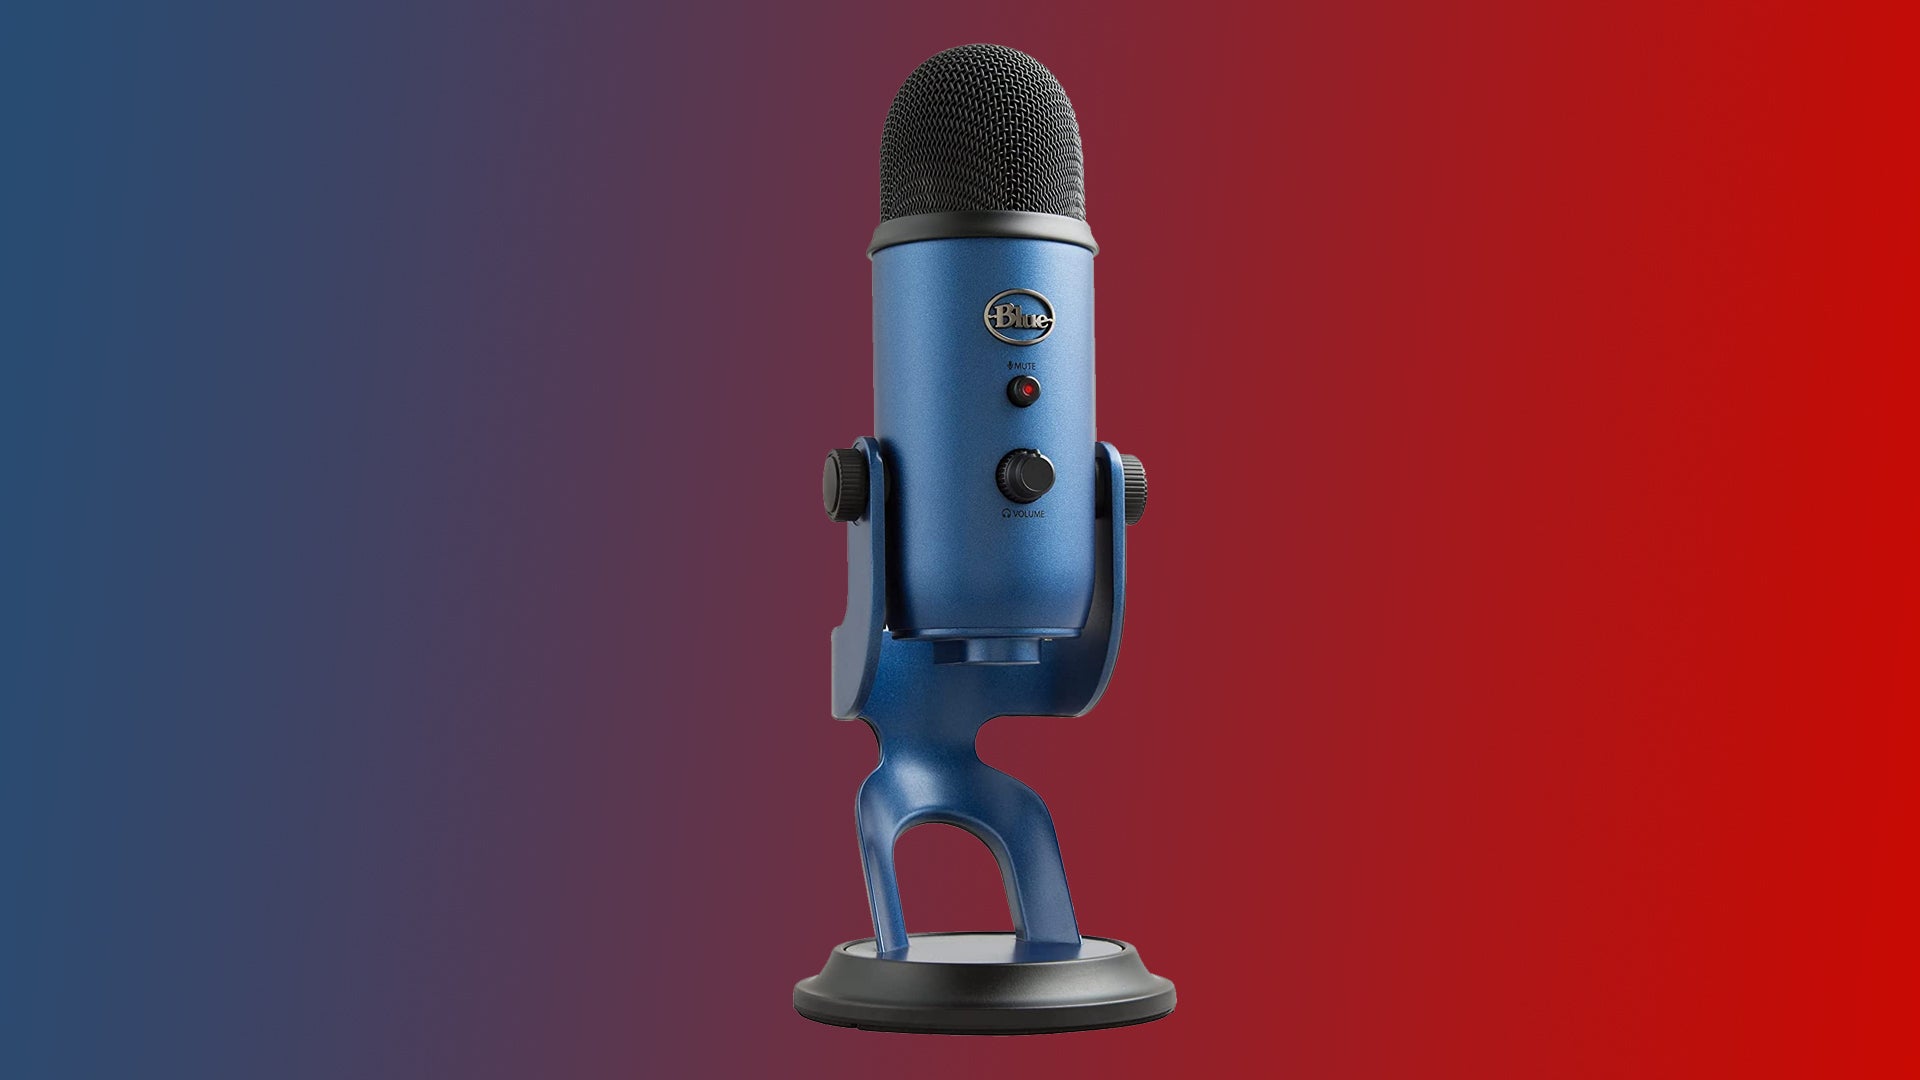 Image of a Blue Yeti microphone on a blue to red gradient background